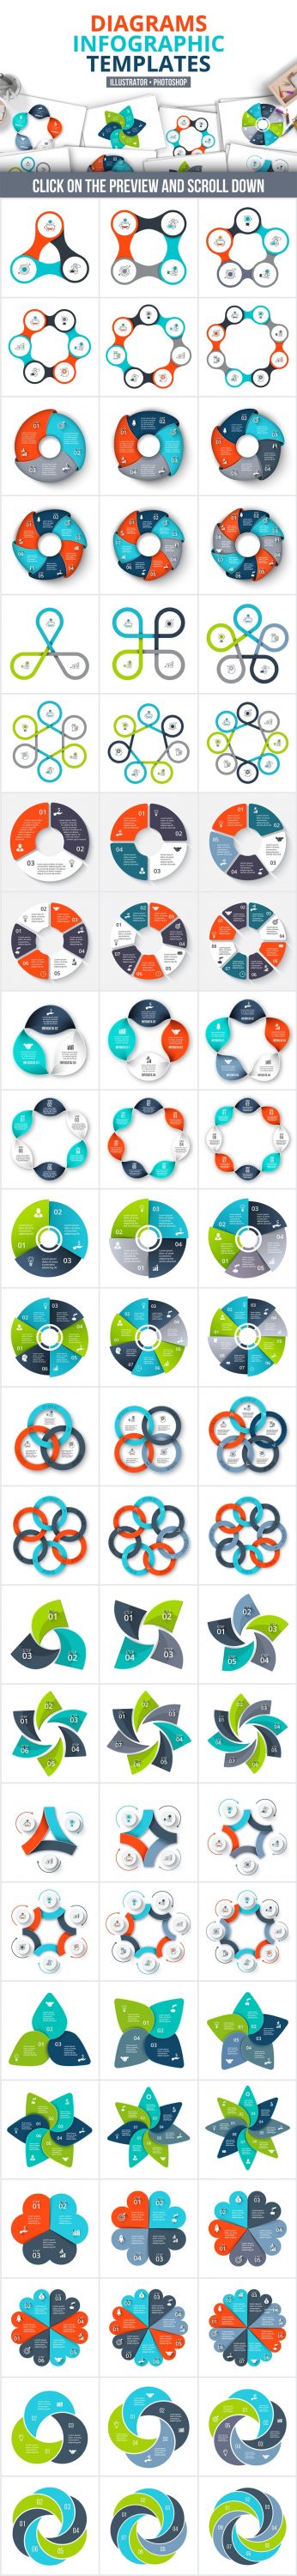 Diagrams Infographic Templates Massive Animated PowerPoint Bundle.